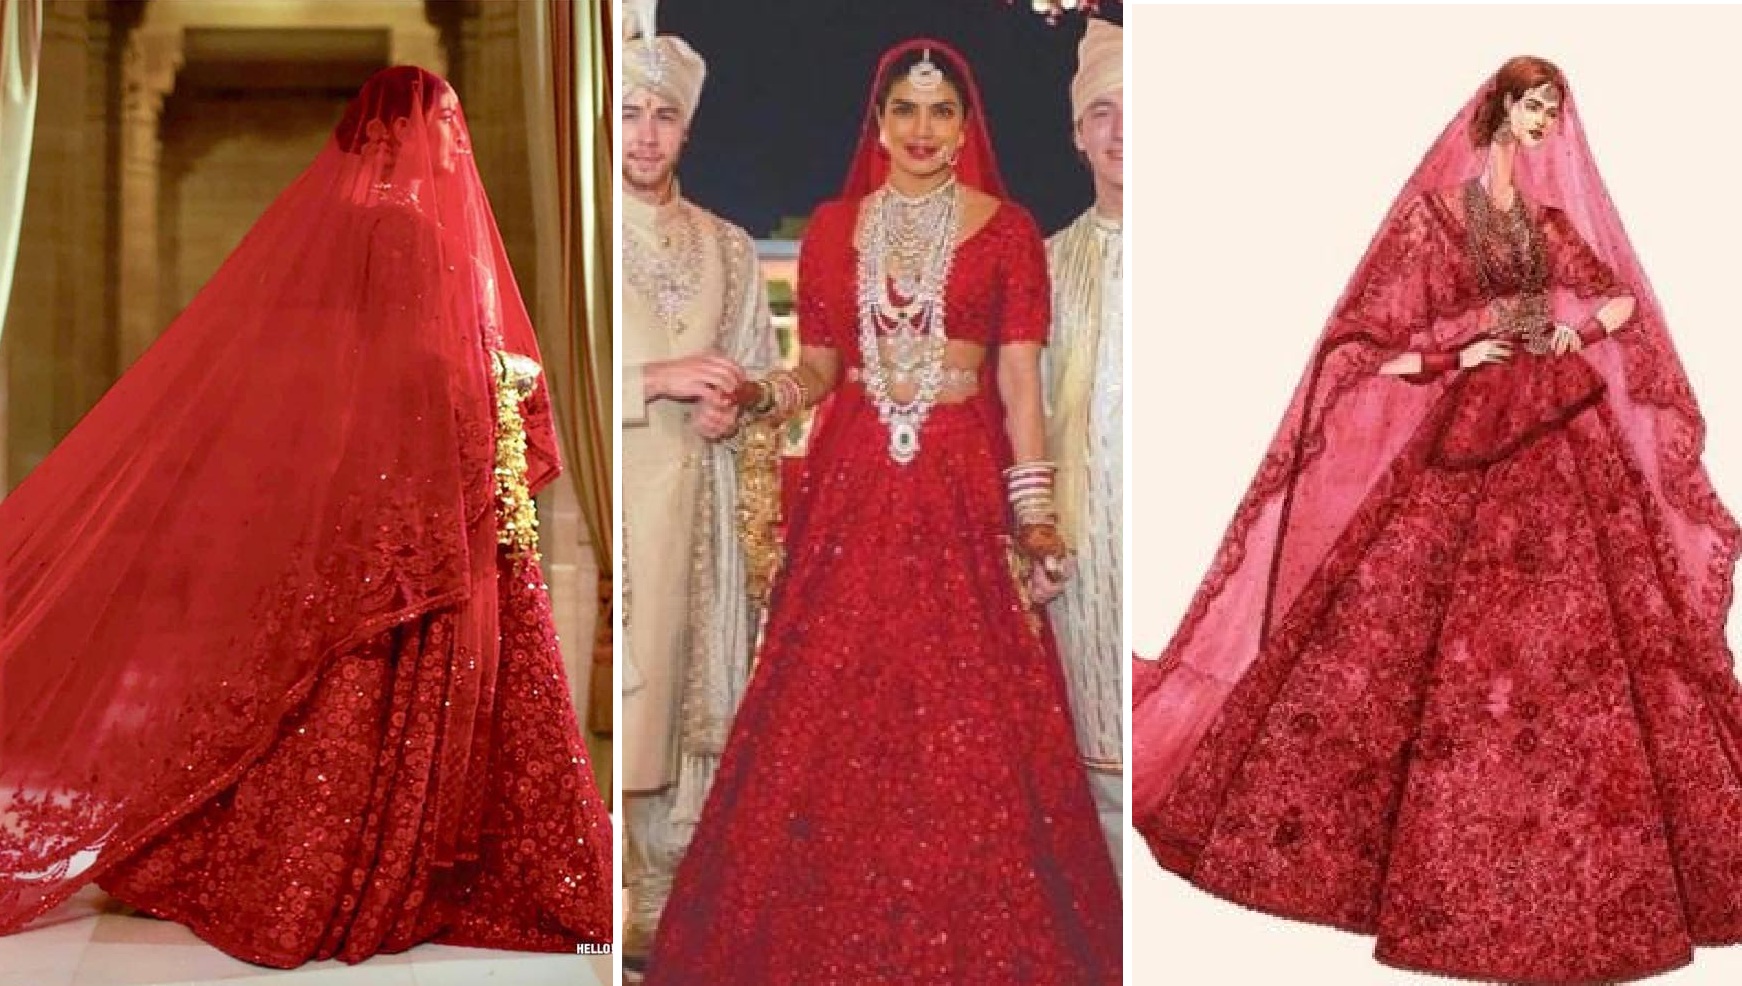 This Video Showcases Just How Much Hardwork and Art Went Into Creating PC’s Wedding-Lehenga!